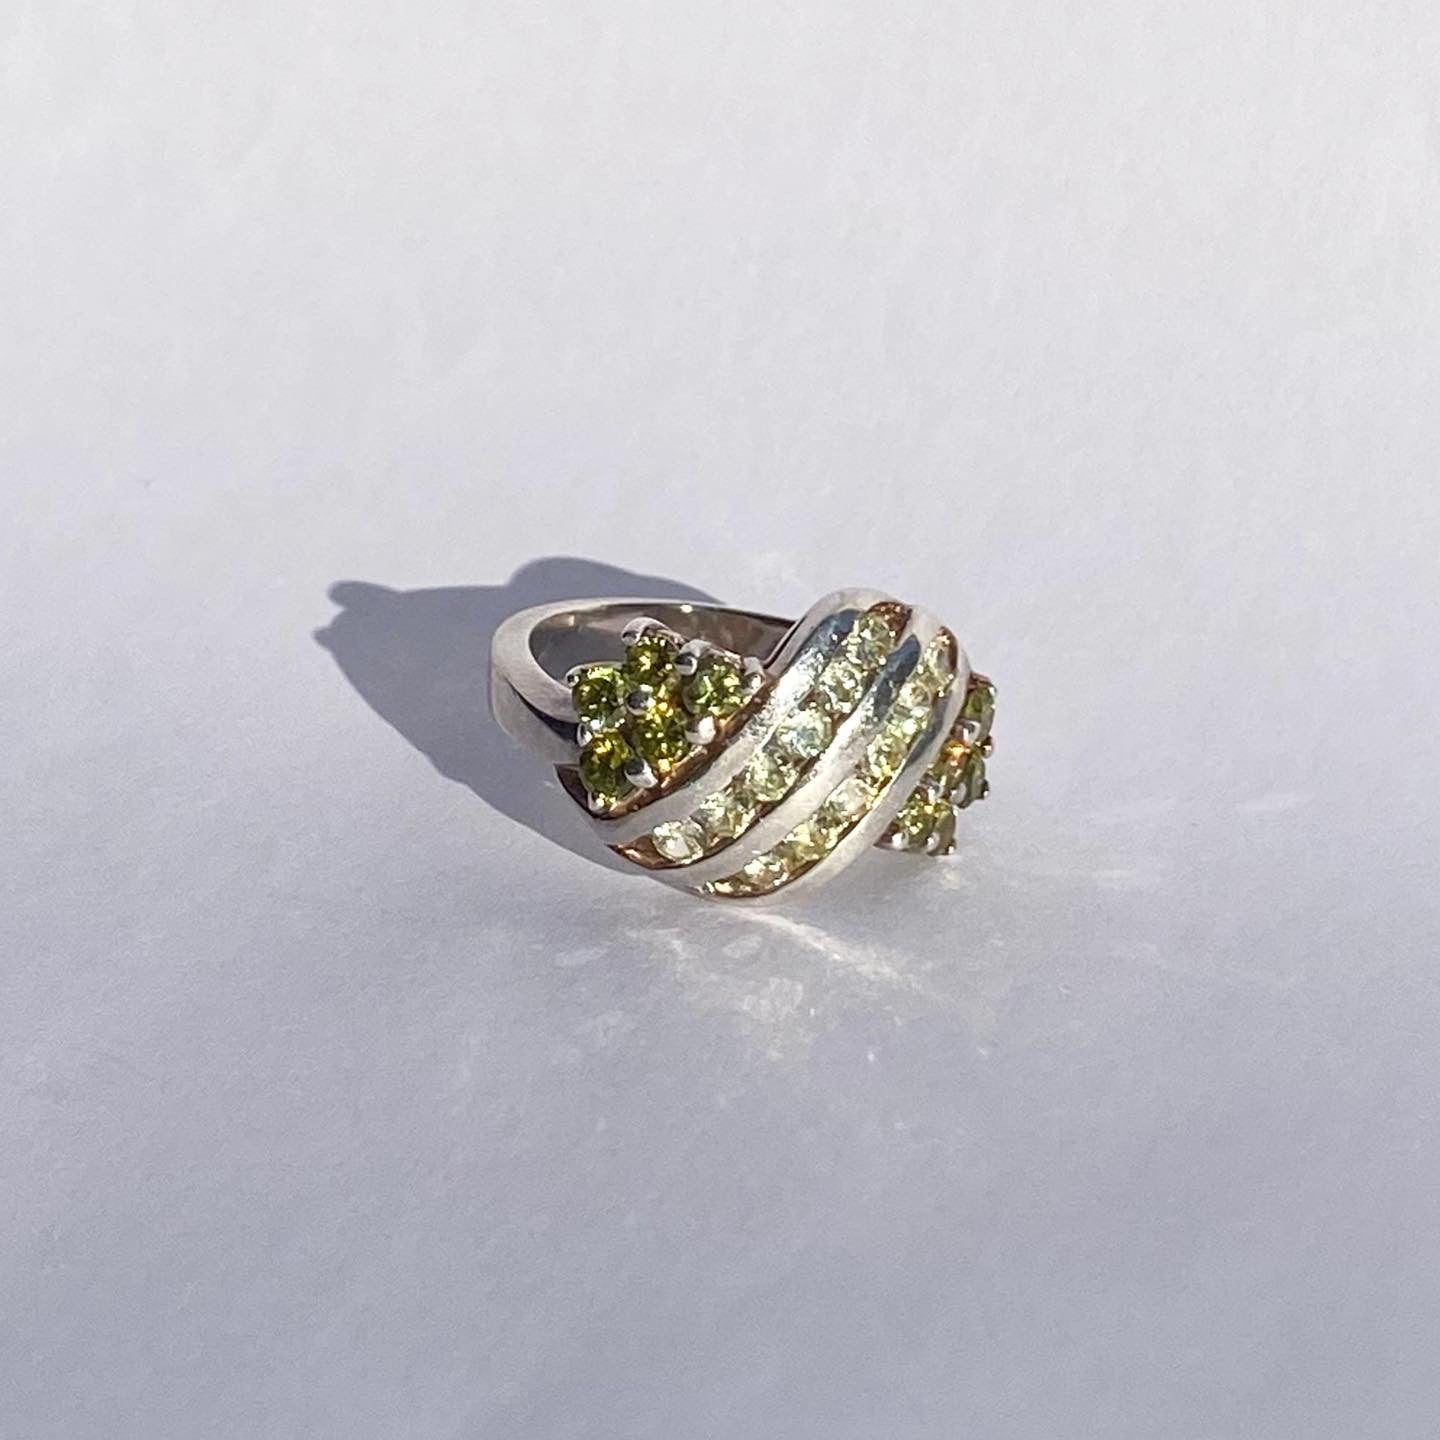 Vintage Silver Ring with Citrines and Peridots